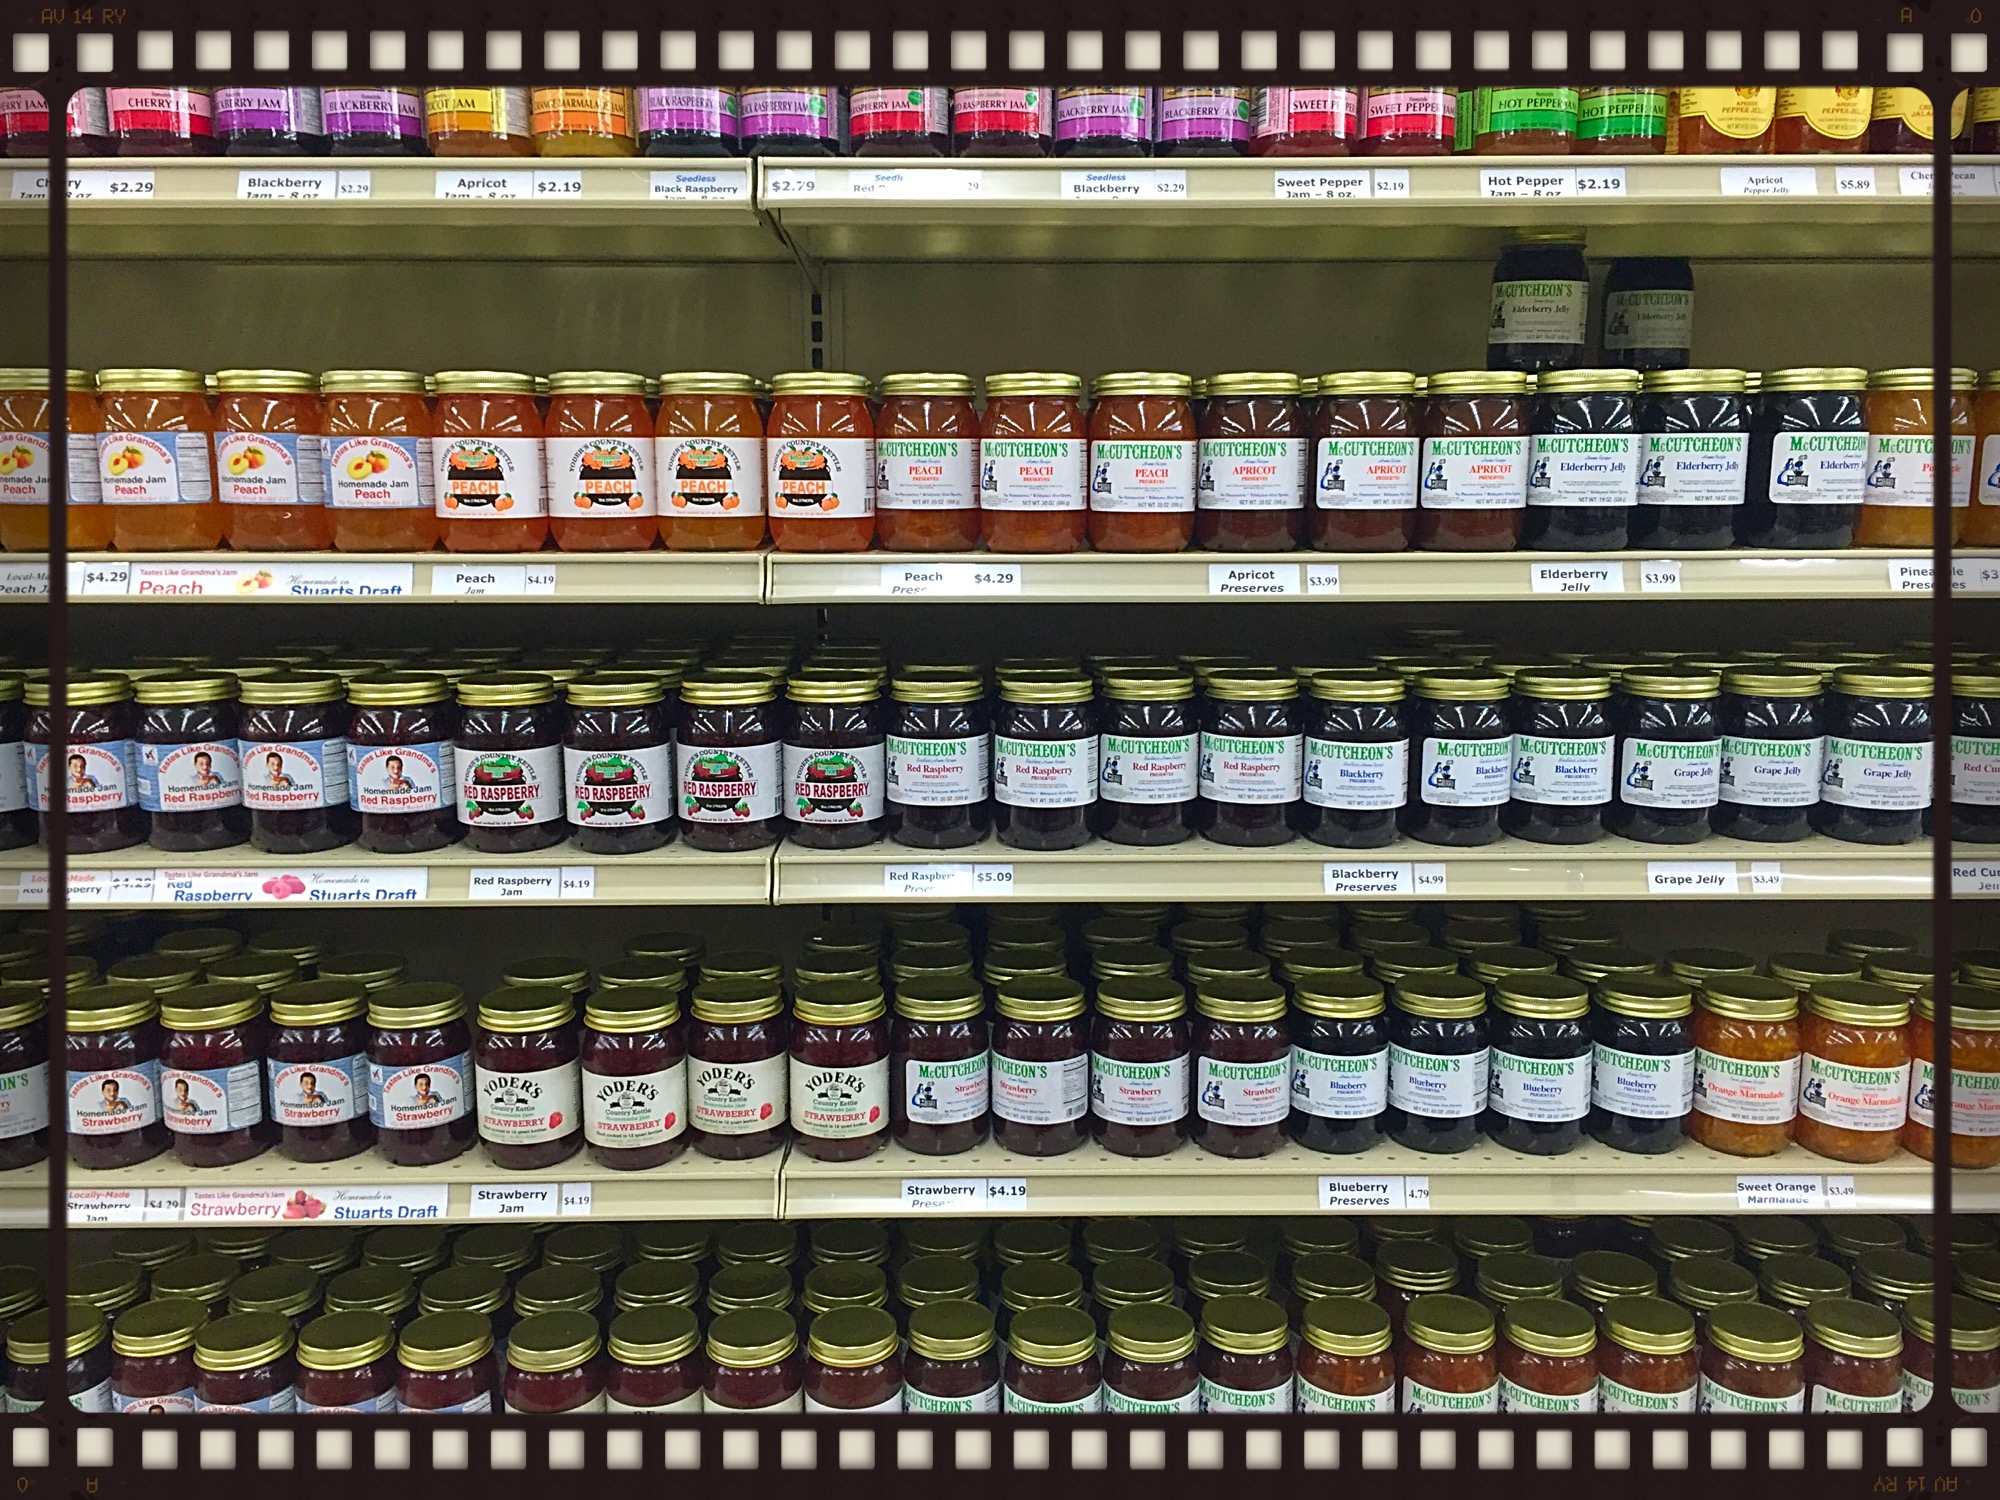 Local Jam Selection at The Cheese Shop